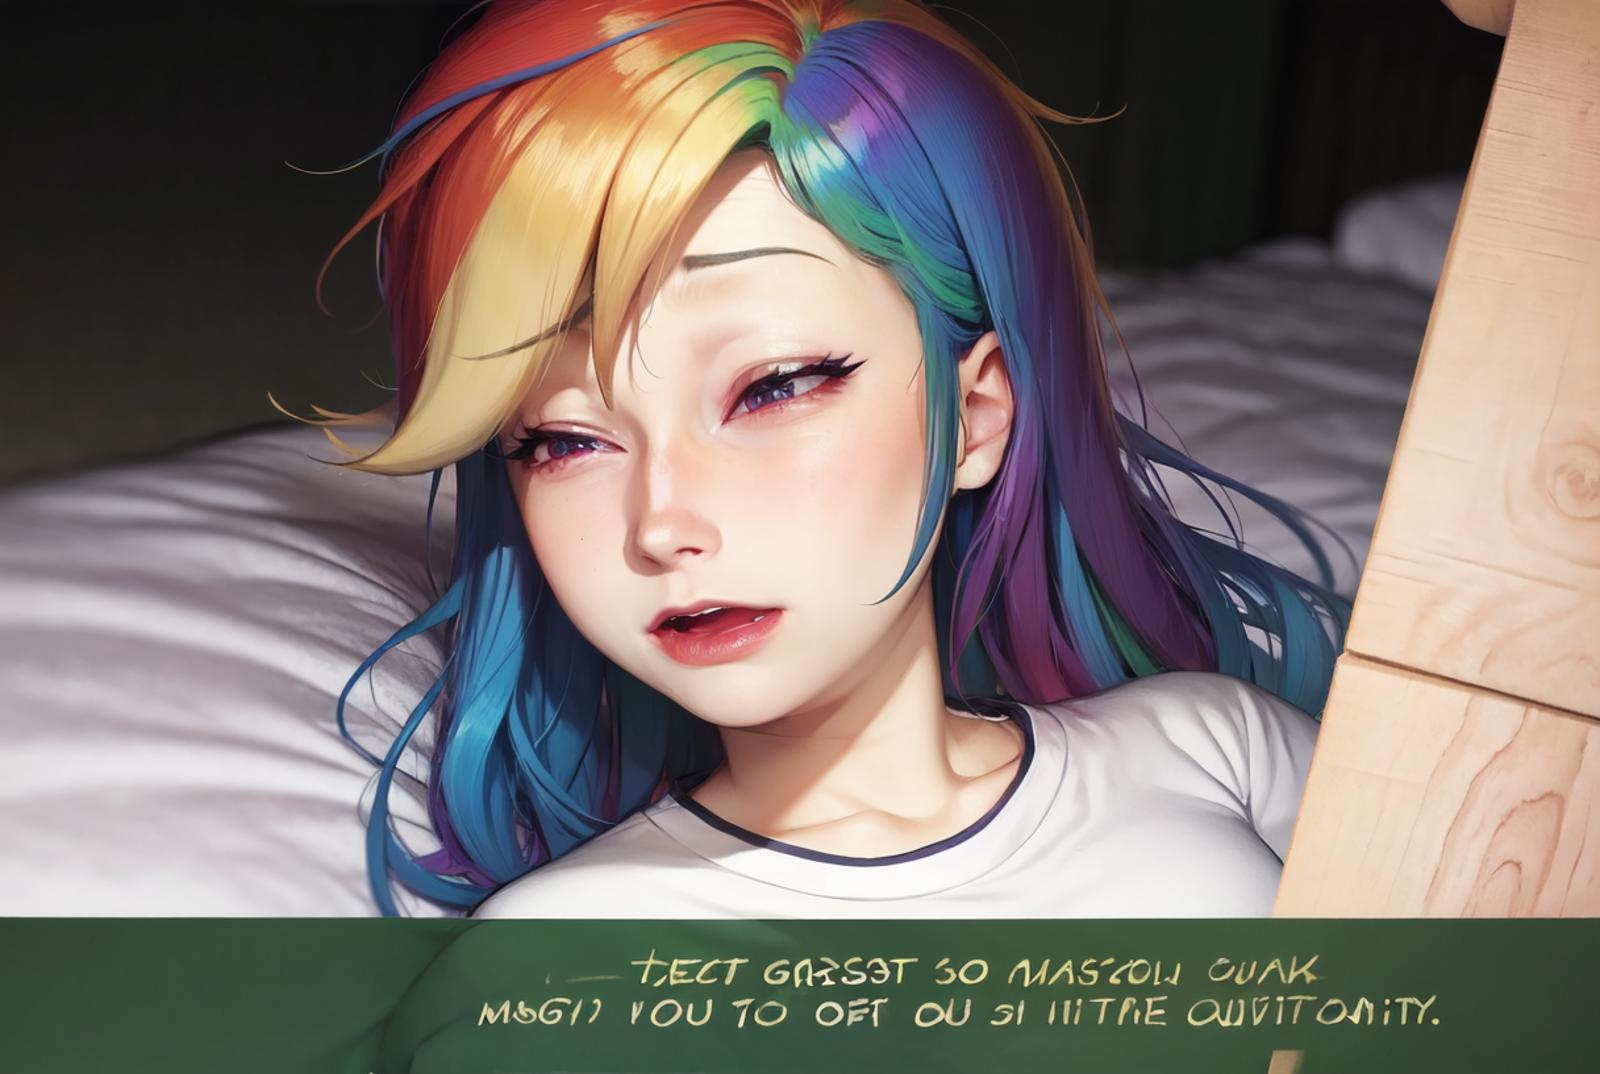 Rainbow Dash | My Little Pony / Equestria Girls image by Flutts